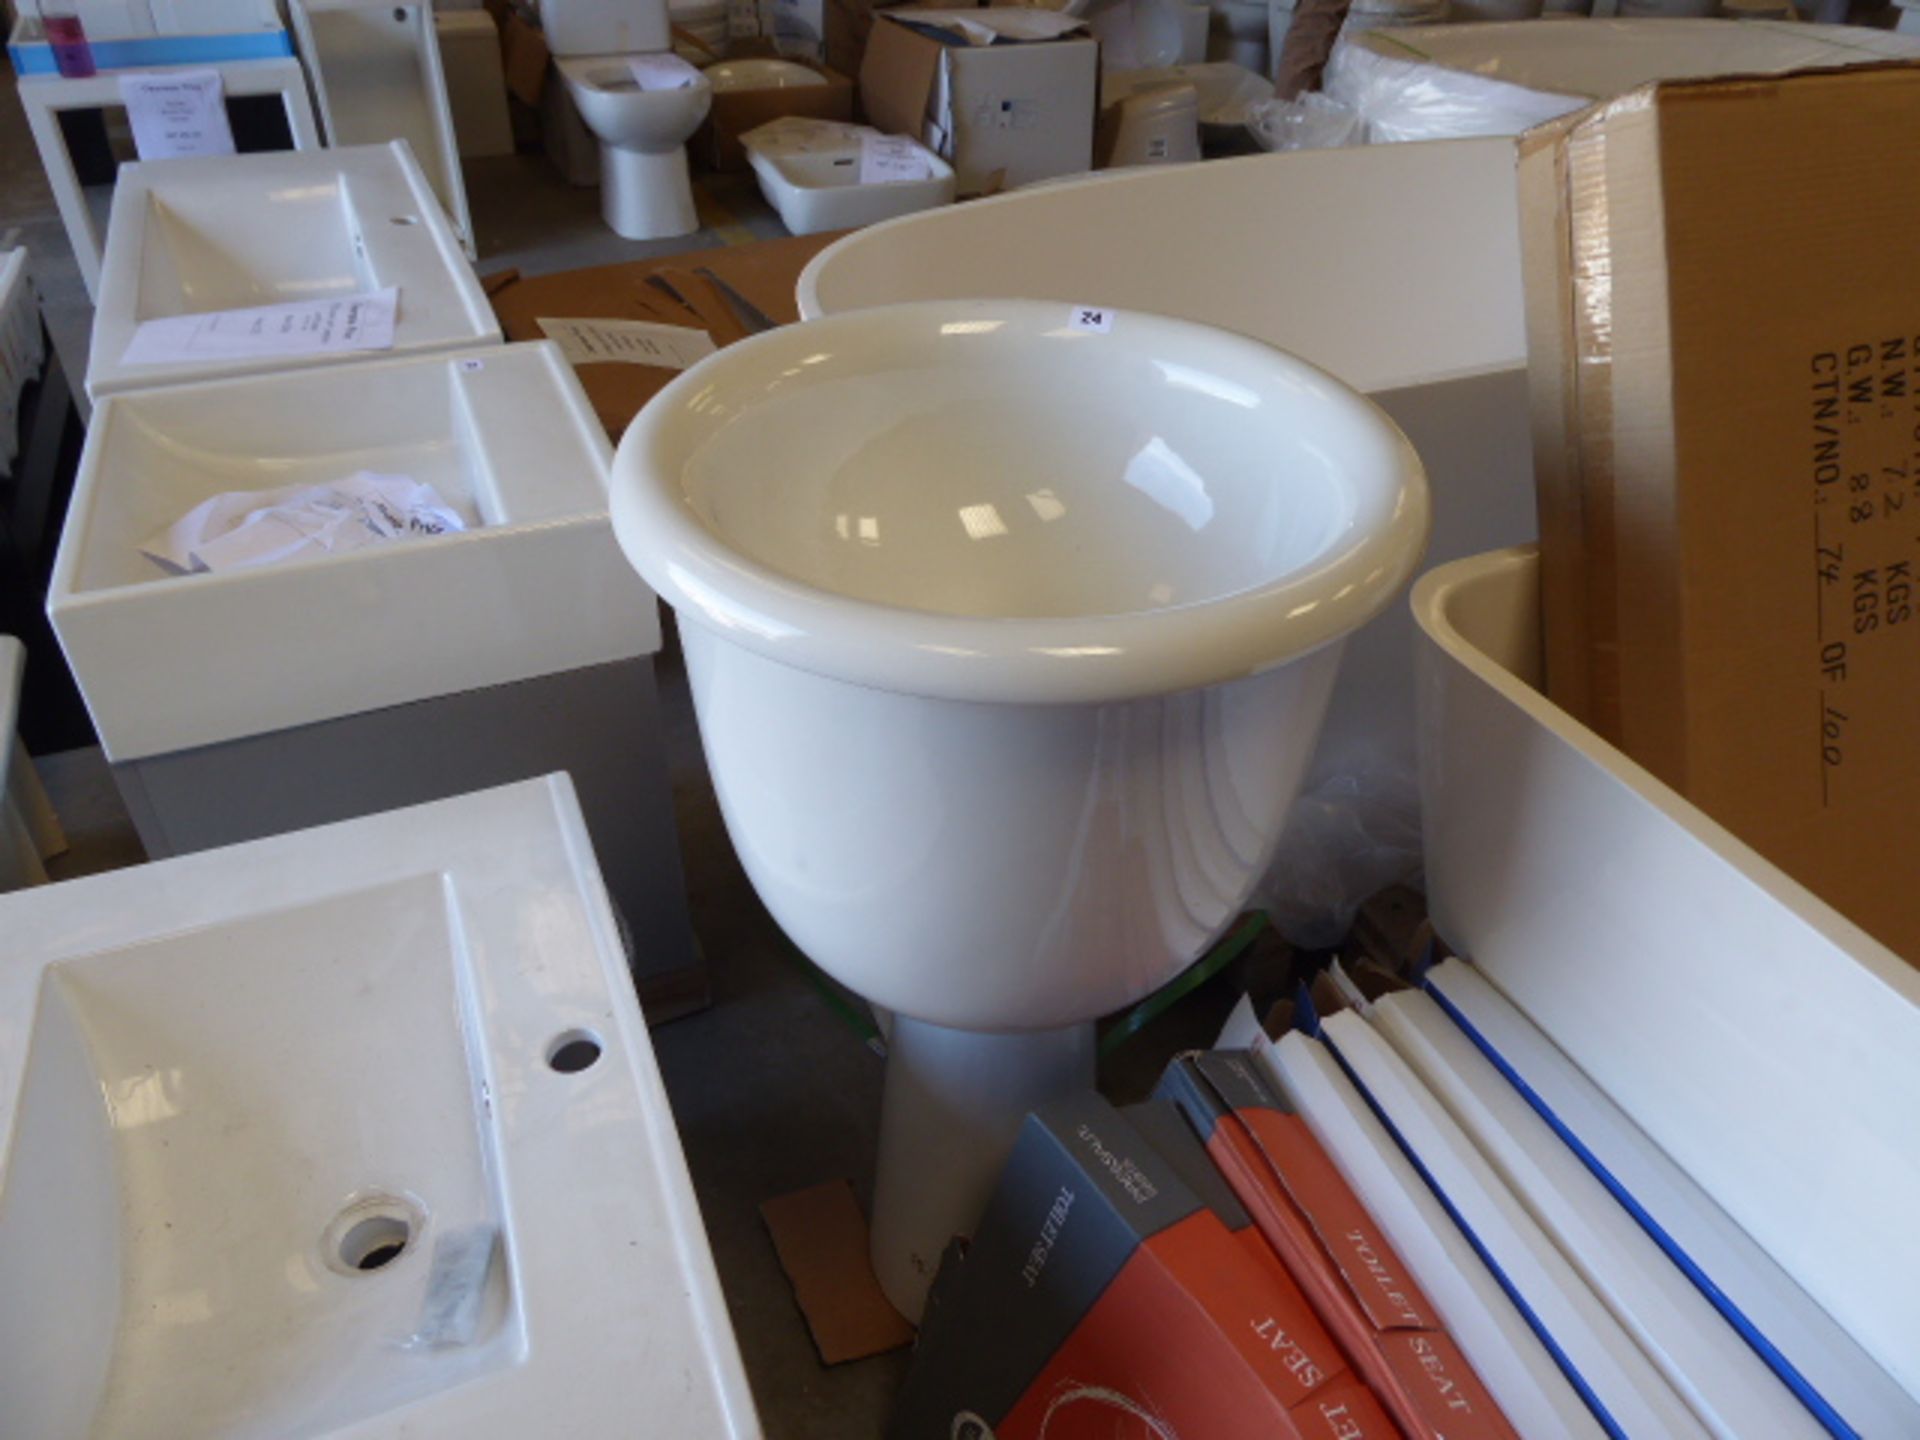 DKM hand basin with large pedestal